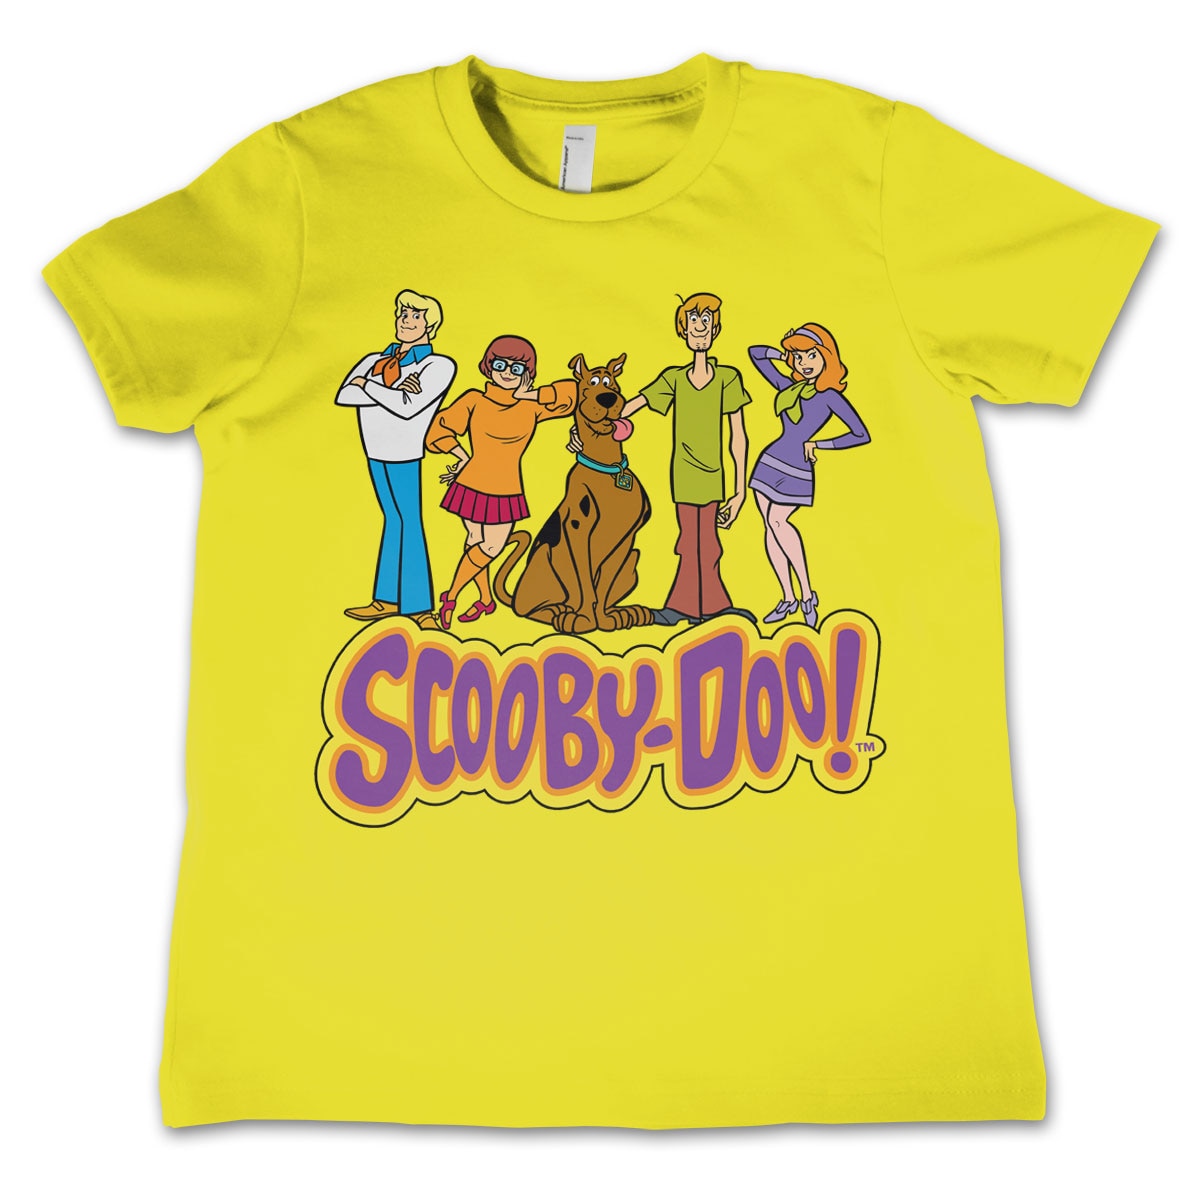 Team Scooby Doo Distressed T-Shirt 